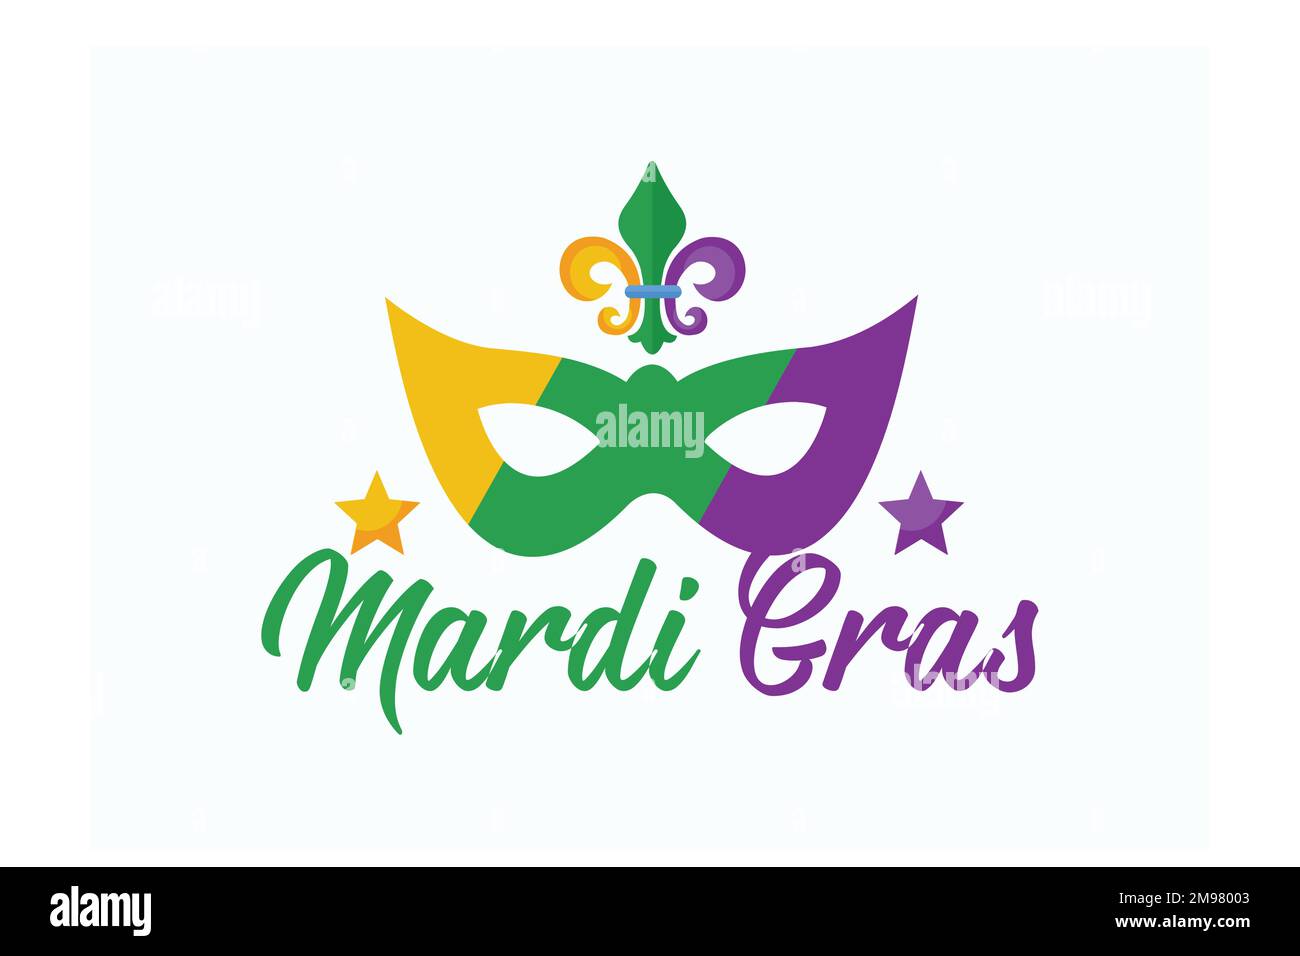 Mardi Gras purple and green text with masquerade mask and fleurs-de-lis. American New Orleans Fat Tuesday poster, greeting card. Sidney Mardi Gras par Stock Vector